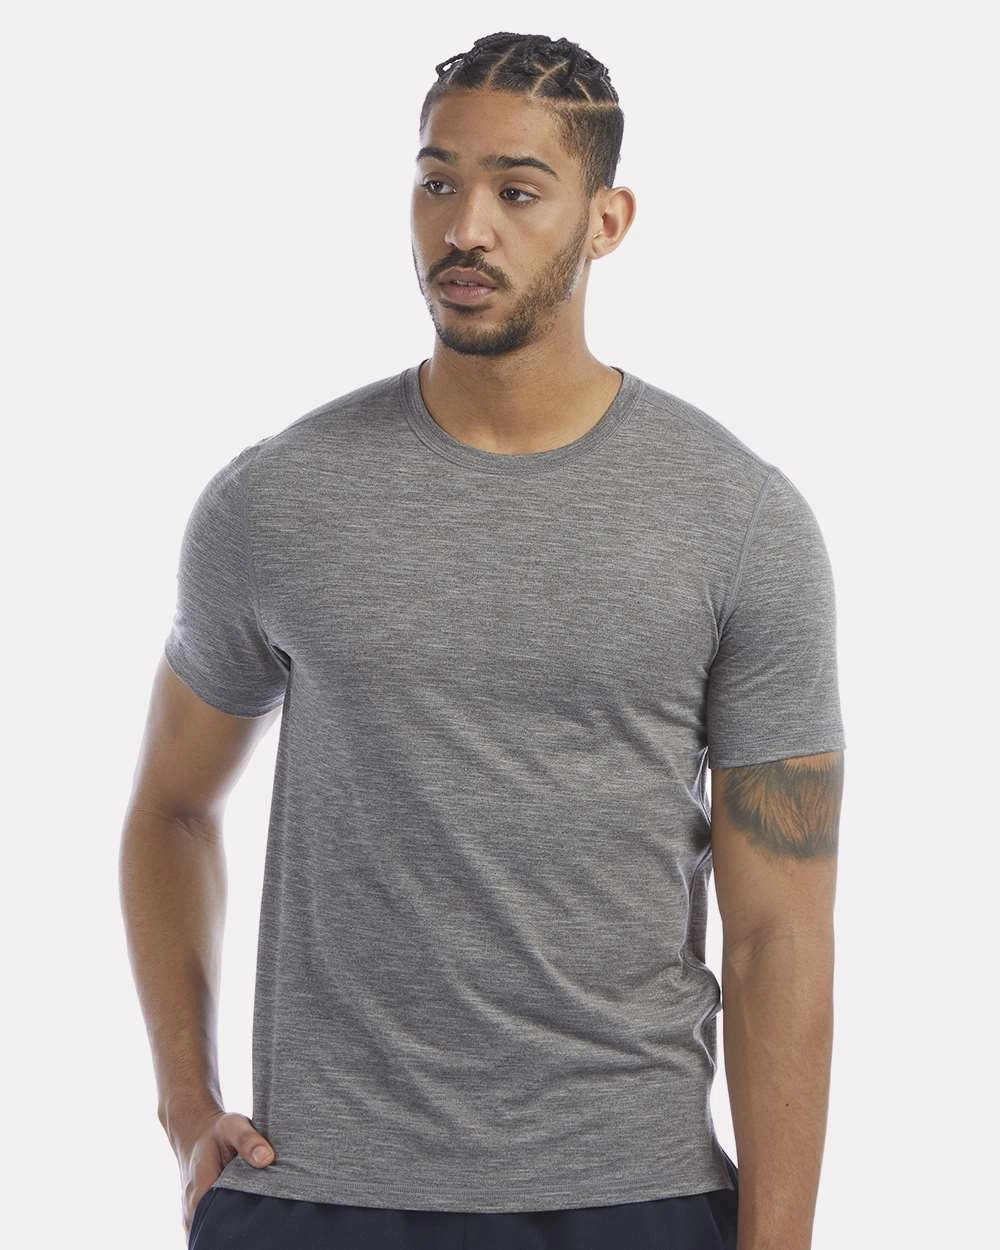 Champion Sport T-Shirt - From $15.46